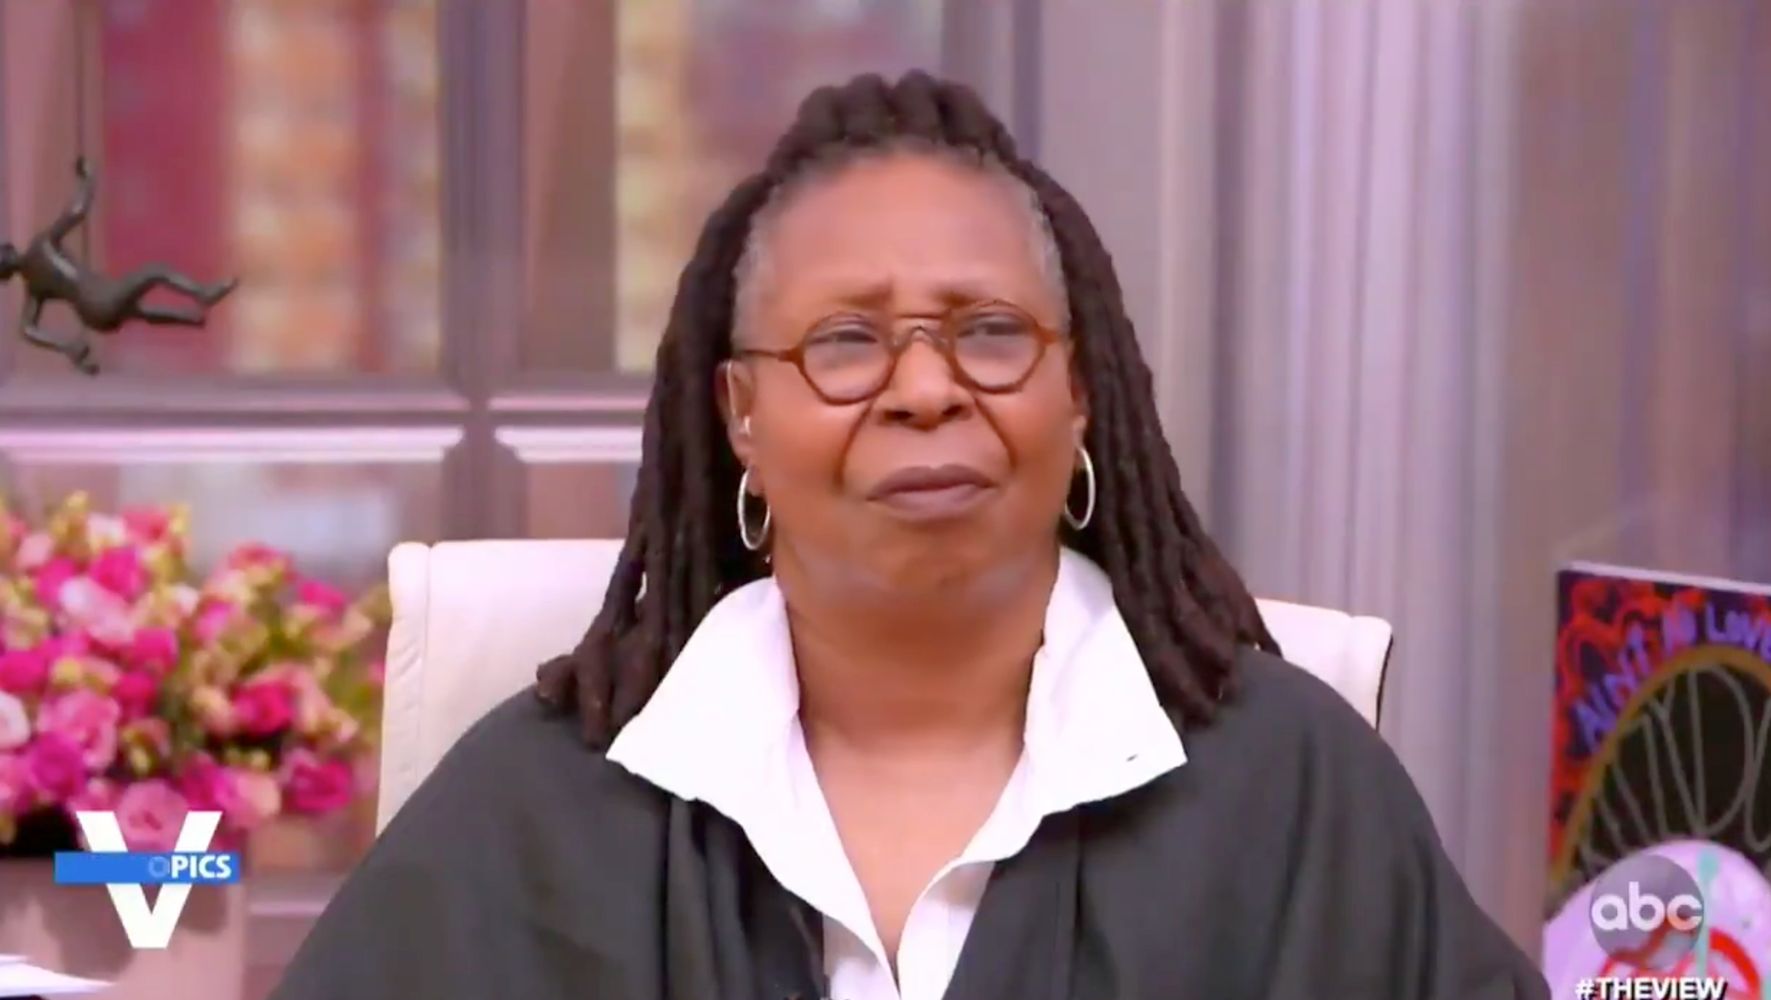 Whoopi Goldberg goes viral because of the one-word reaction to Meghan McCain Rant